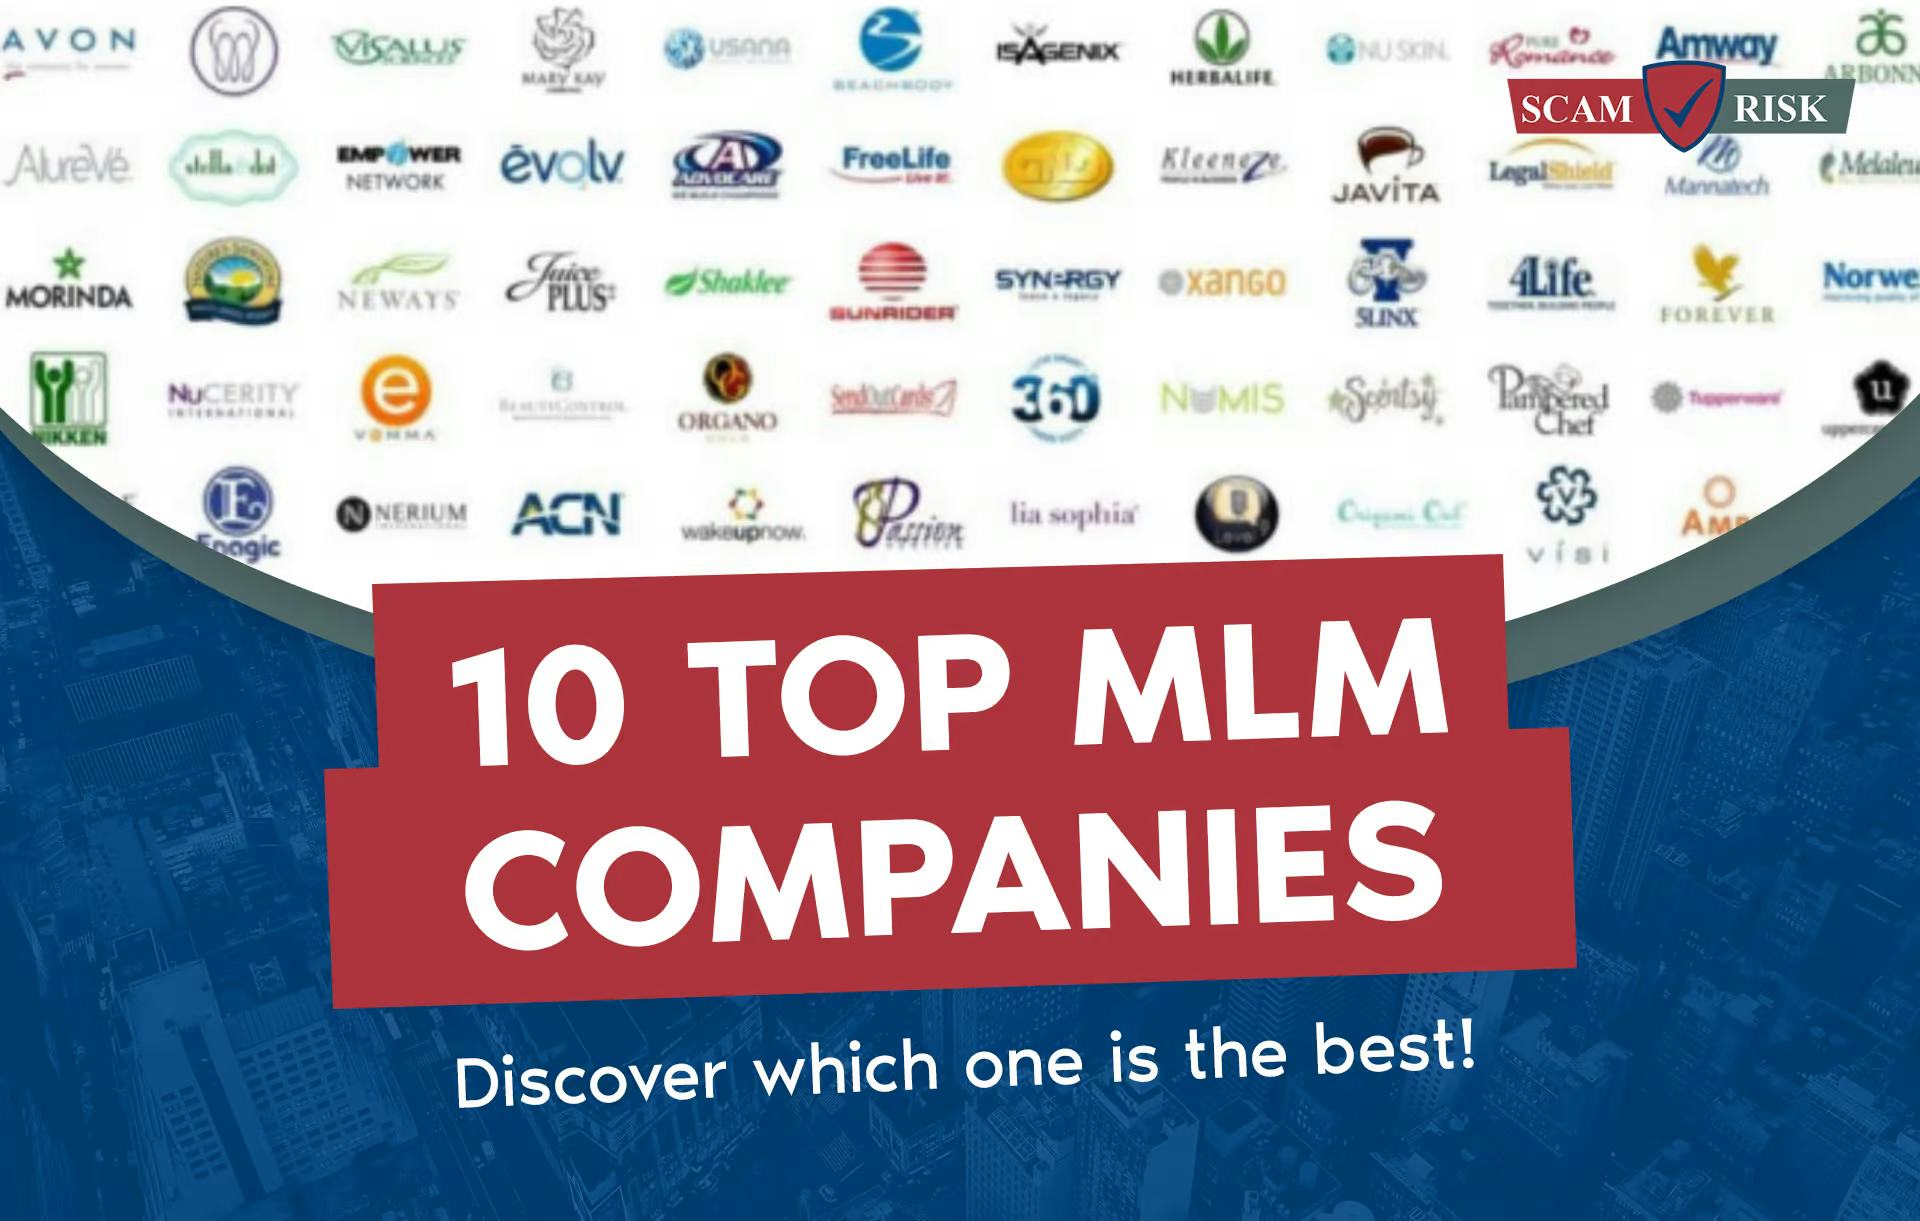 10 Top MLM Companies - Discover which one is the best!